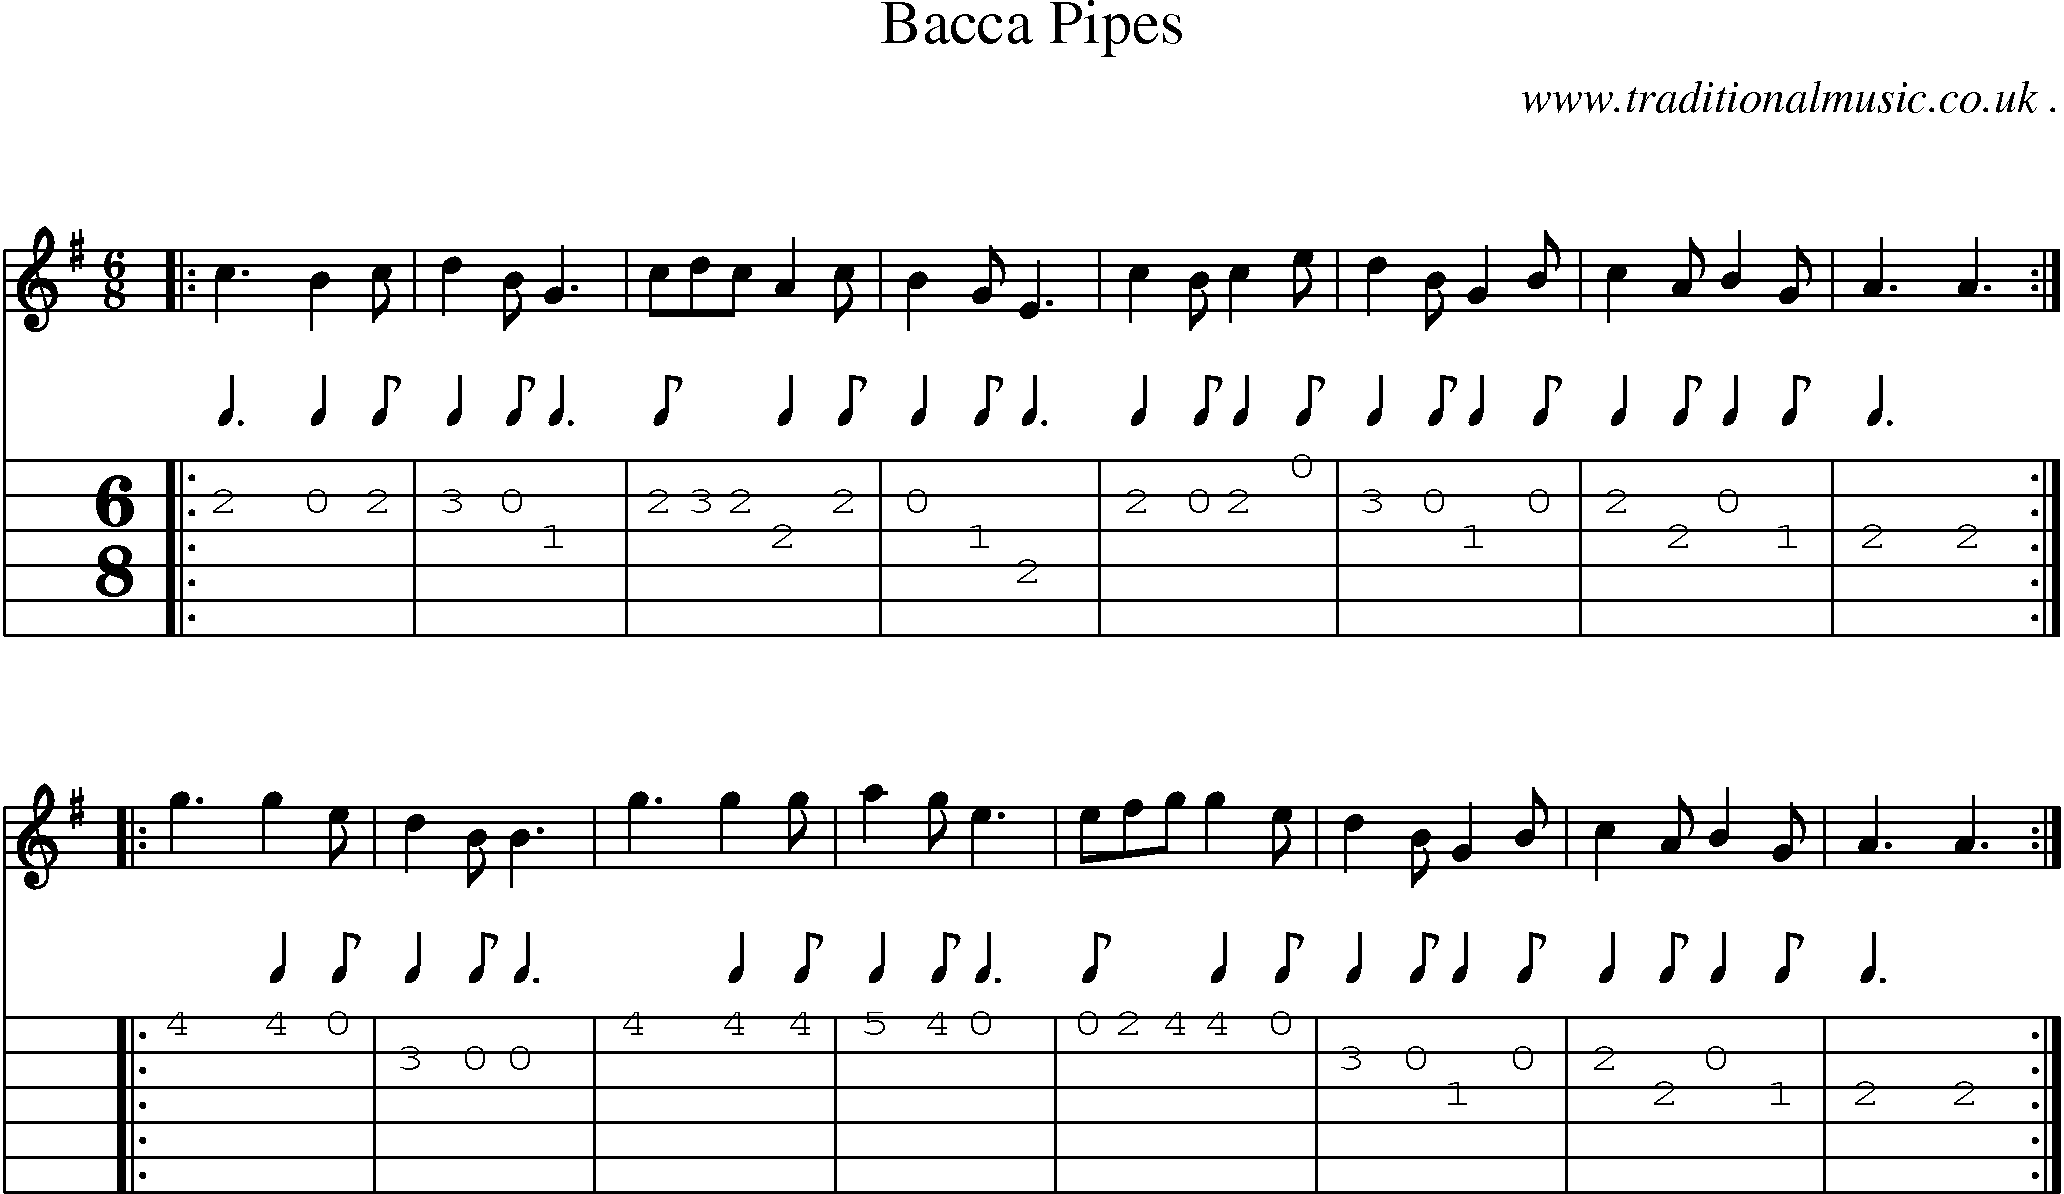 Sheet-Music and Guitar Tabs for Bacca Pipes